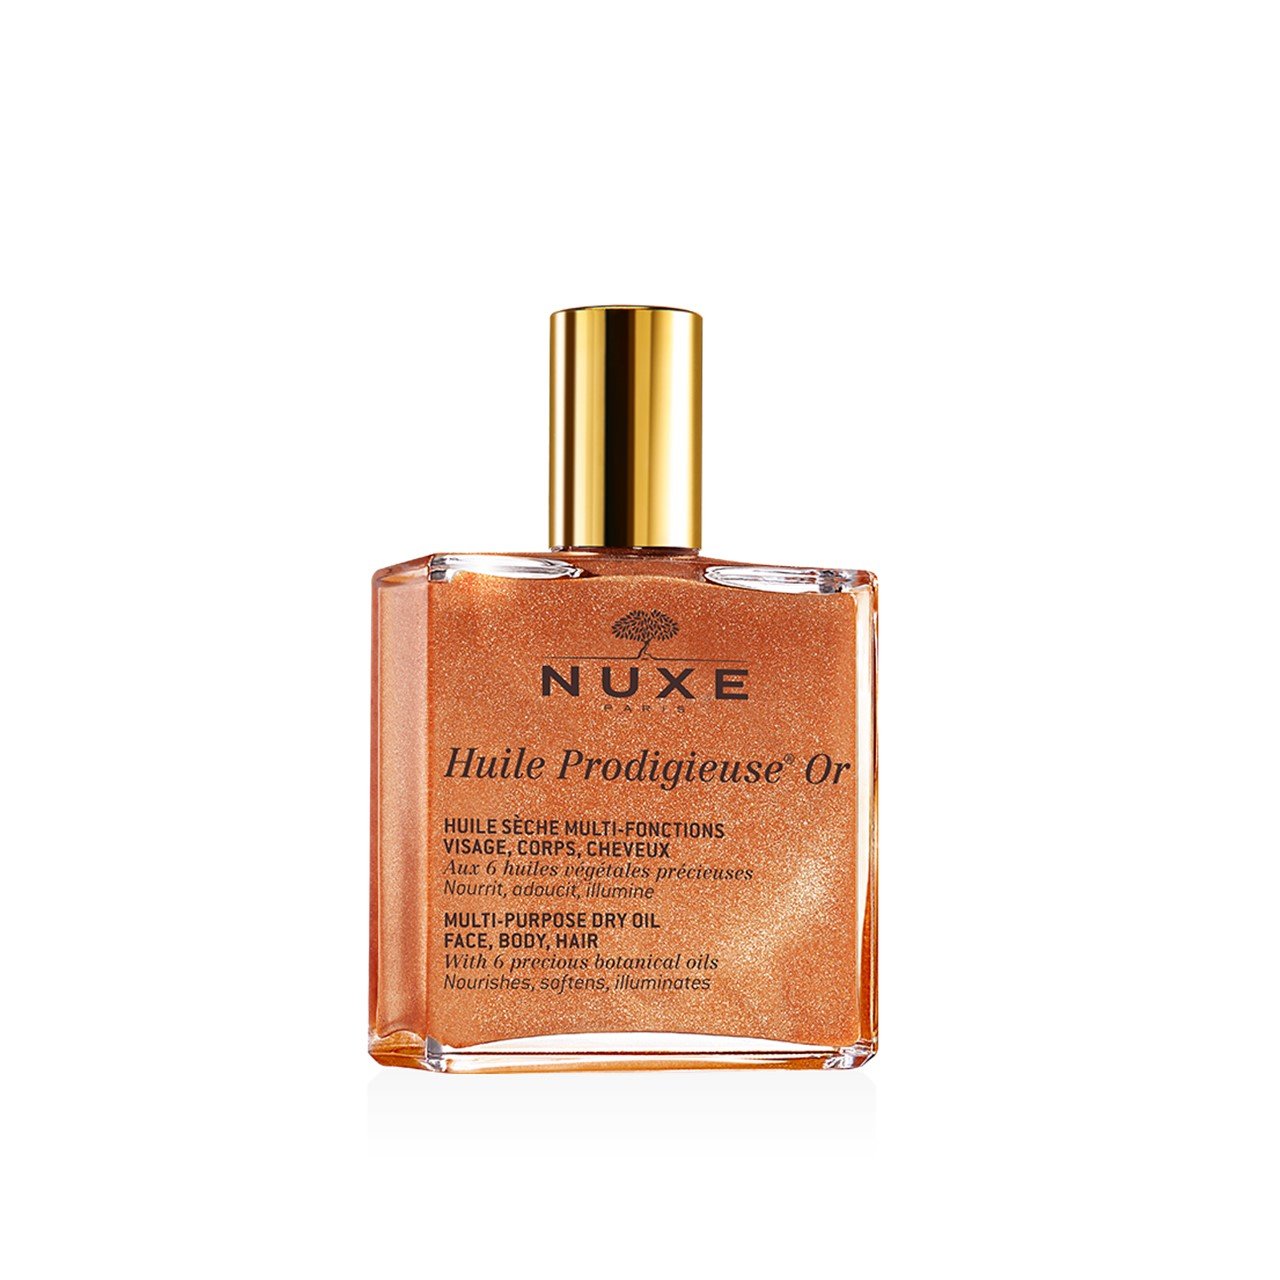 NUXE Huile Prodigieuse Shimmering Dry Oil with Spray 100ml (3.38fl oz)